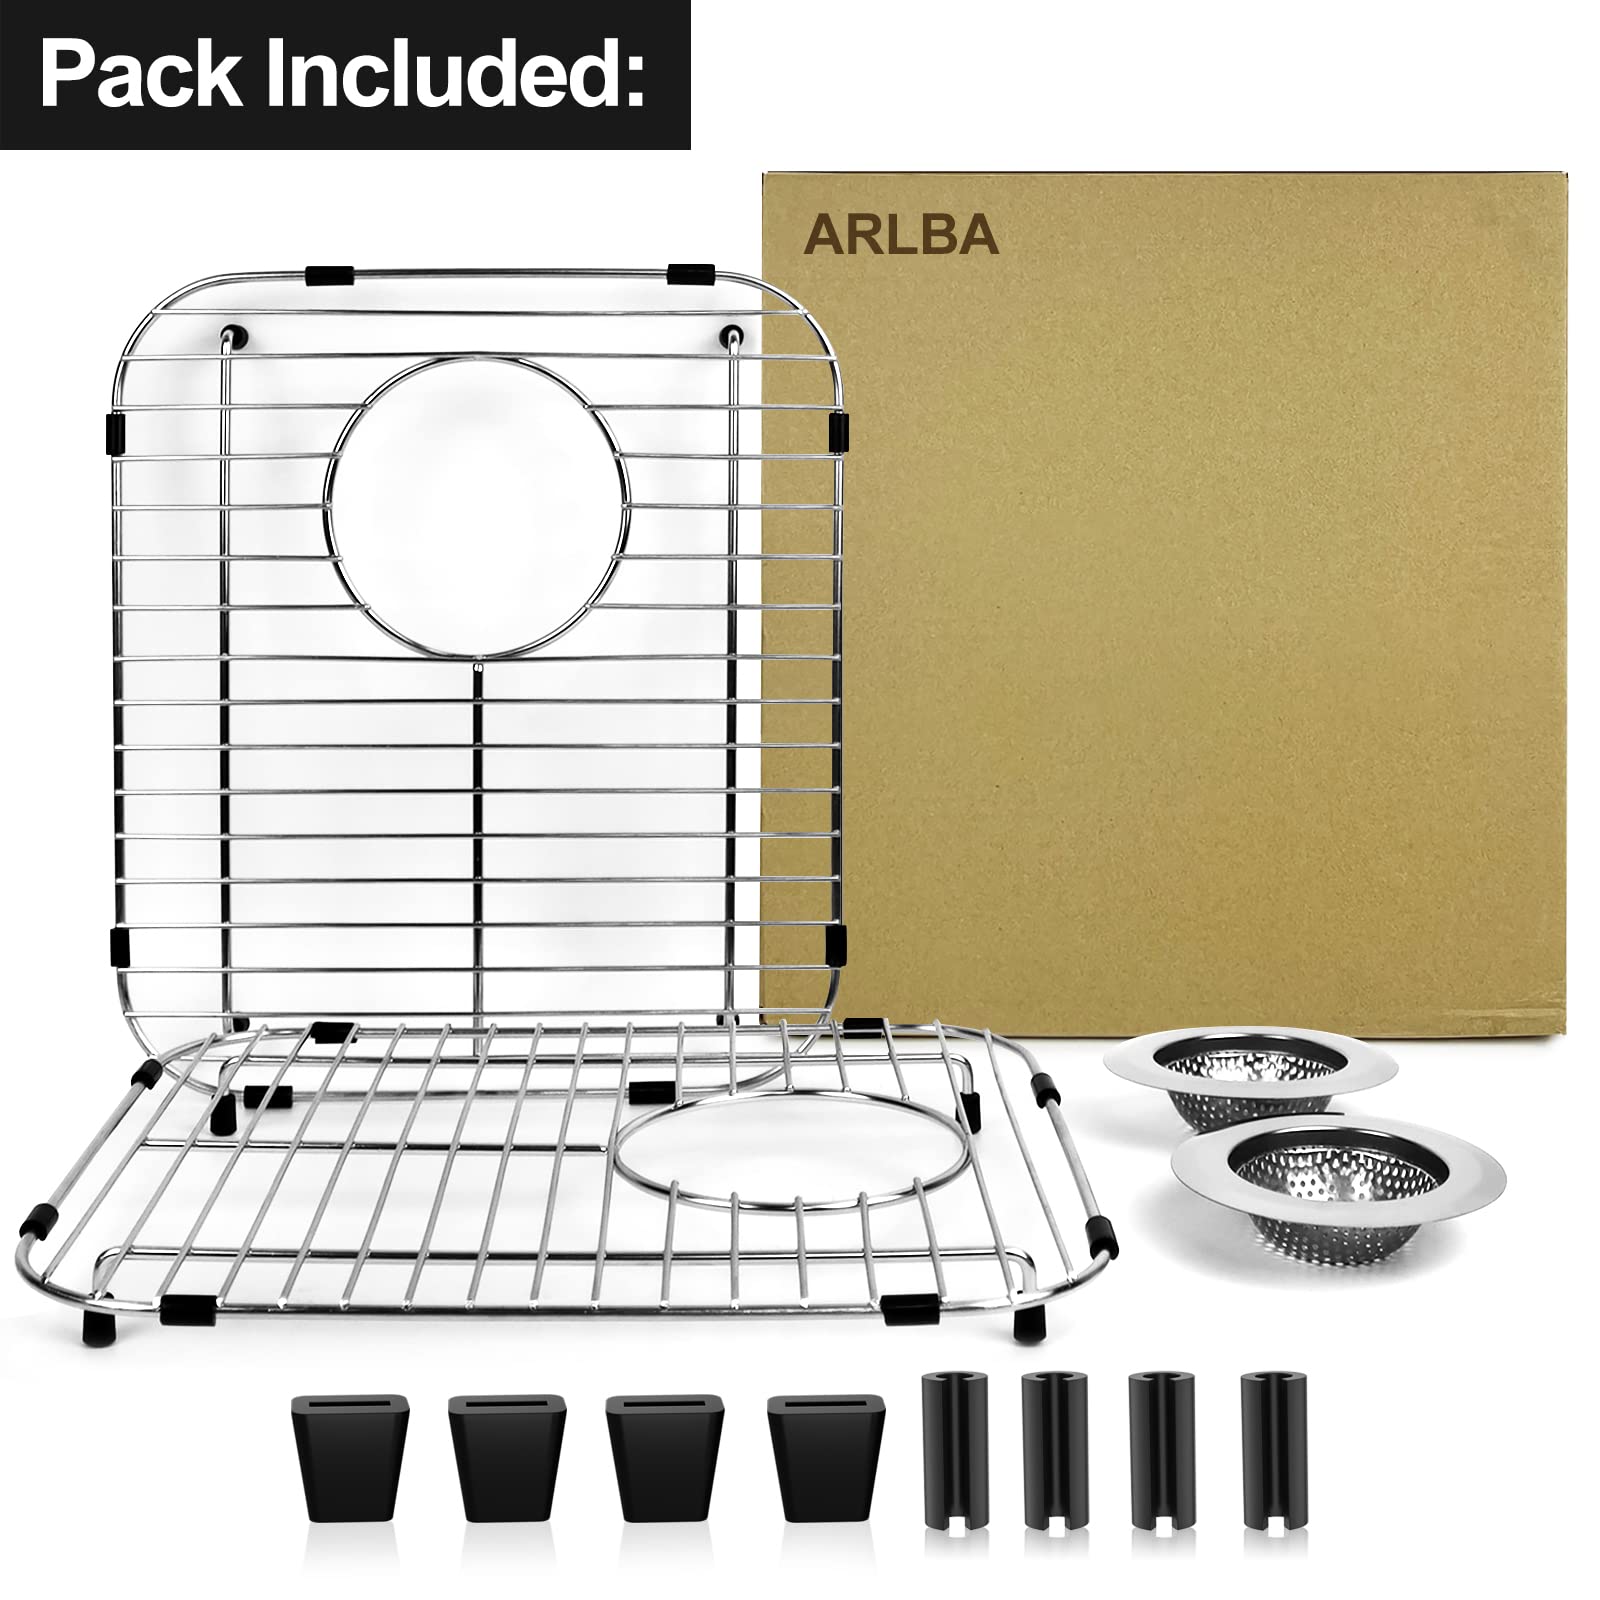 ARLBA 2 Pack 304 Stainless Steel Sink Protectors for Kitchen Sink with Rear Drain Hole,13.2"x11.5"x1.25" Kitchen Sink Grid Universal,Sink Grate Sink Rack for Bottom of Sink with 2Pack Sink Strainers